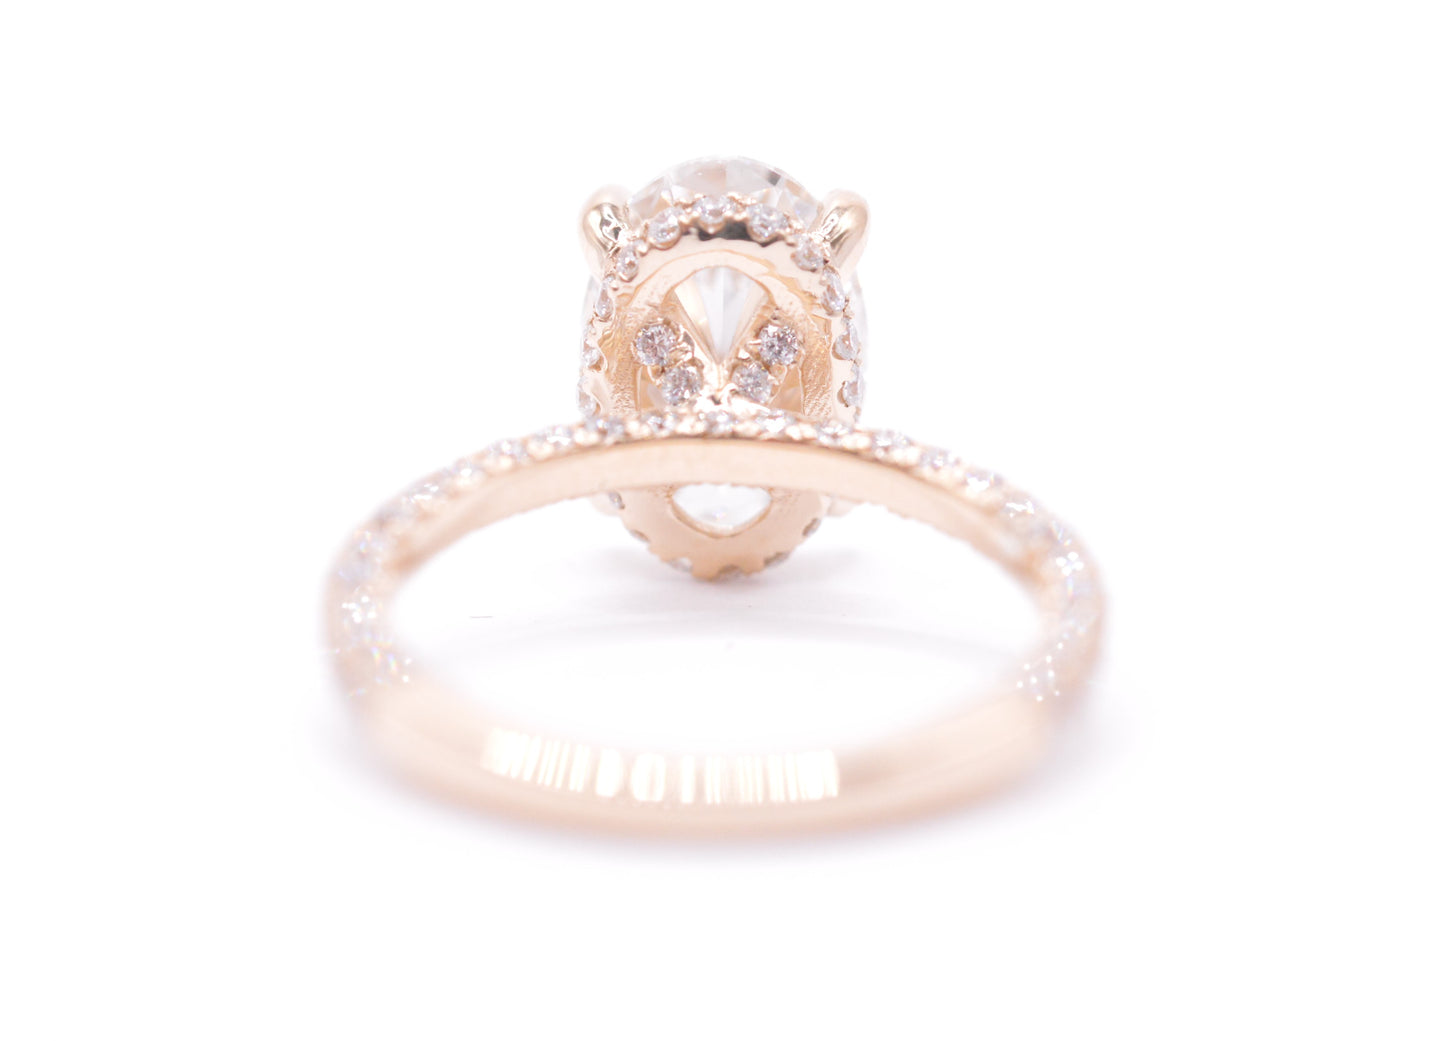 Made to Order-3ct Oval Lab Diamond Engagement Ring 14K Yellow Gold Made to Order Rings